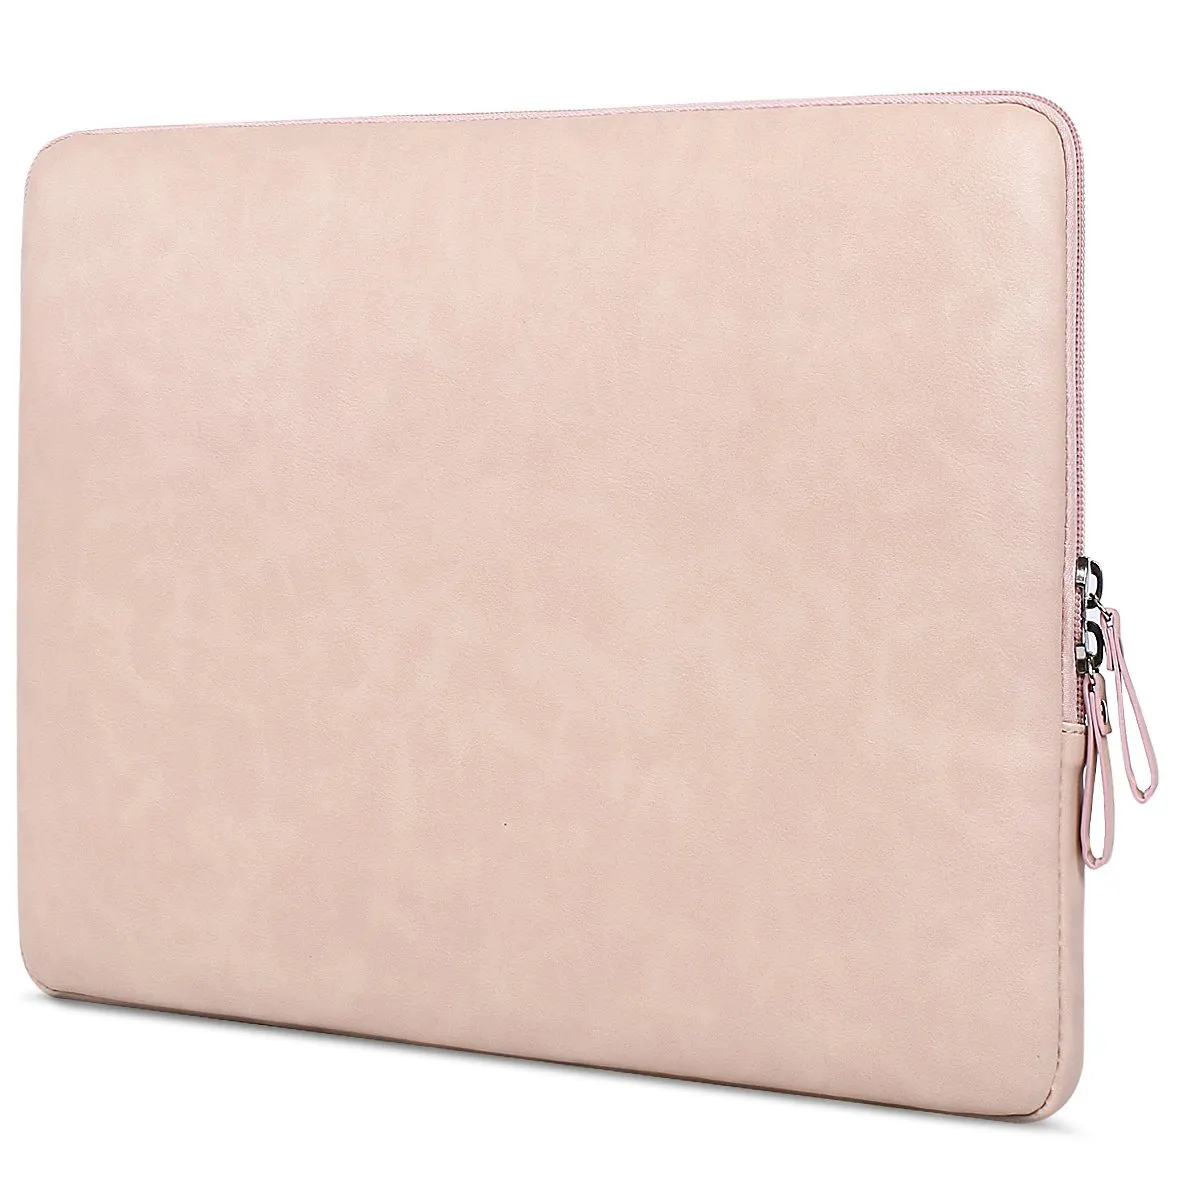 Laptop Sleeve Bag For Apple notebook MacBook Air For Pro protective case 13 / 14 / 15 inch inner case